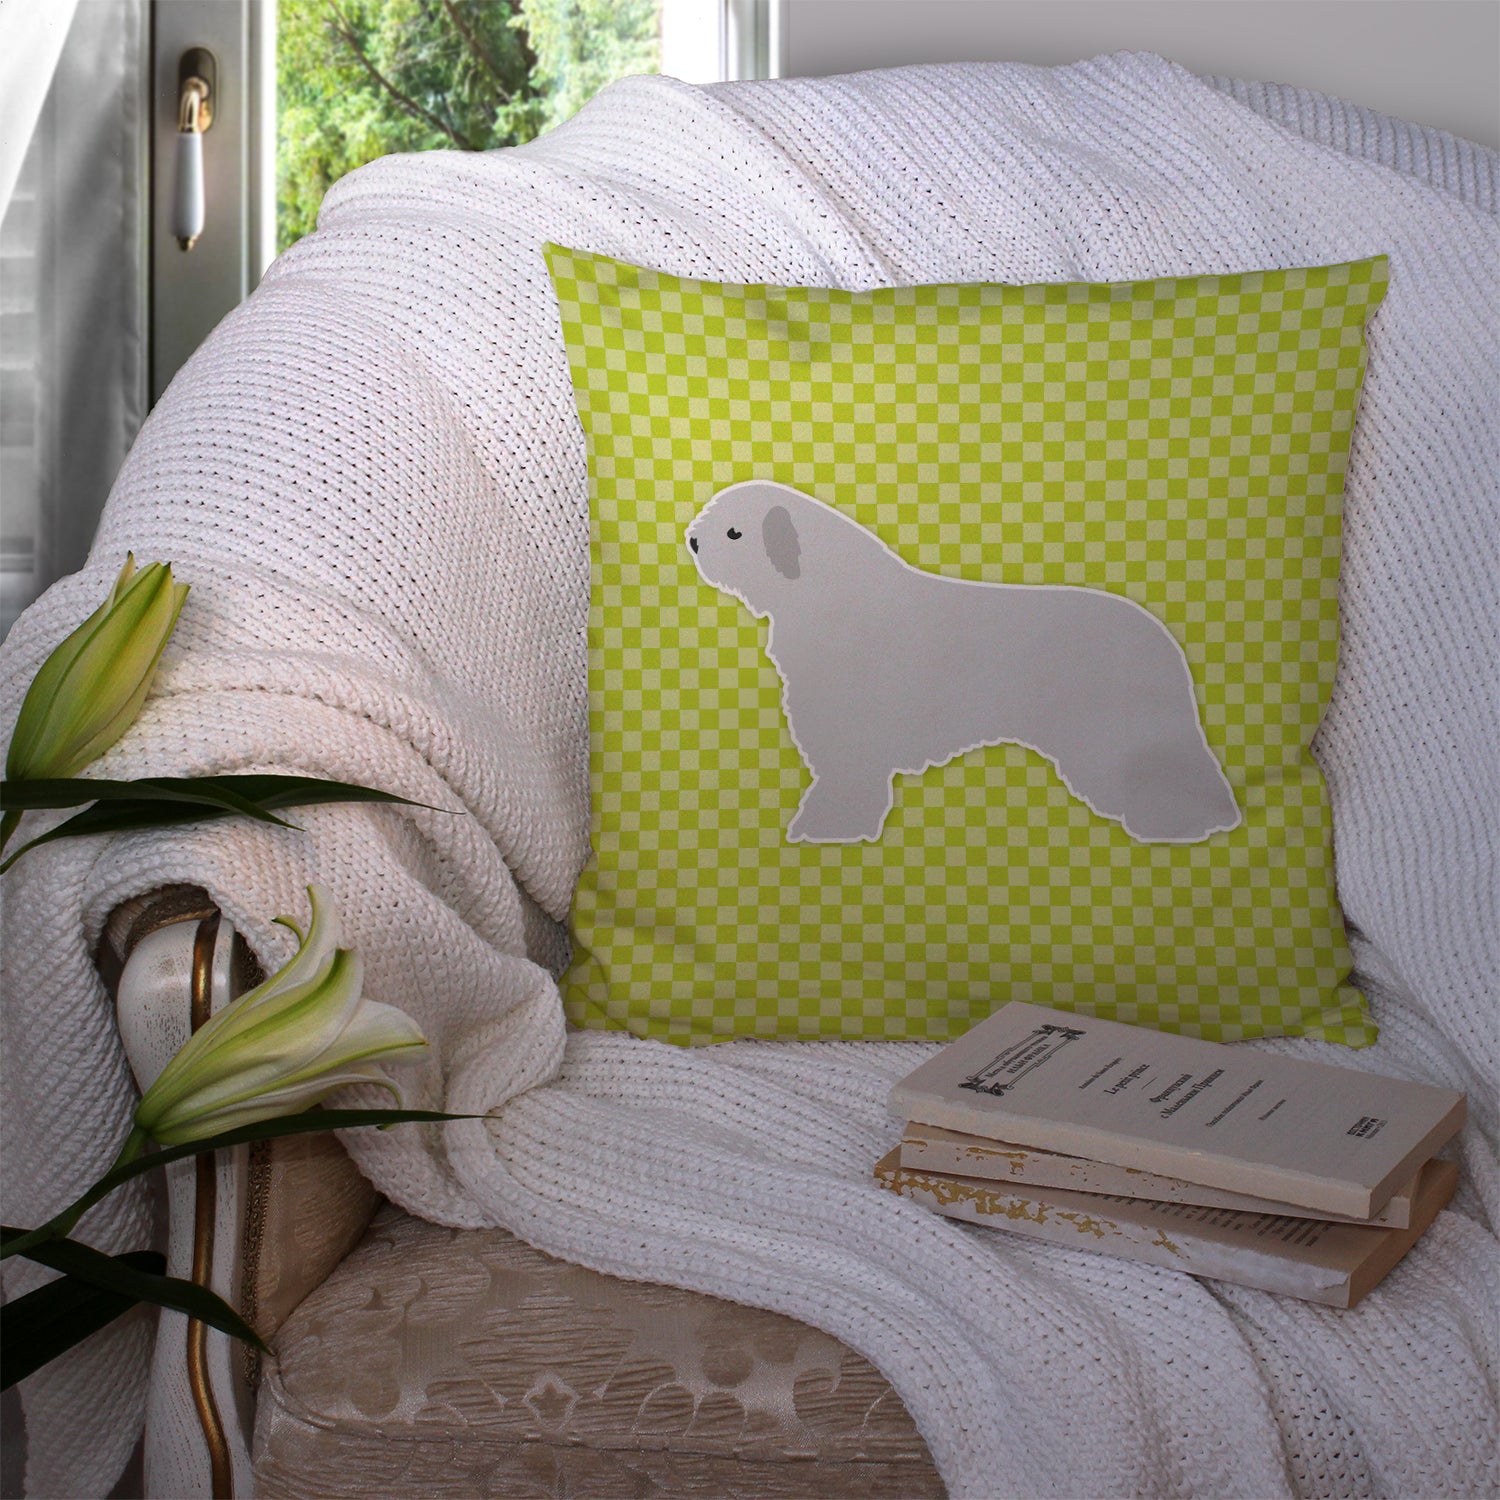 Spanish Water Dog Checkerboard Green Fabric Decorative Pillow BB3815PW1414 - the-store.com